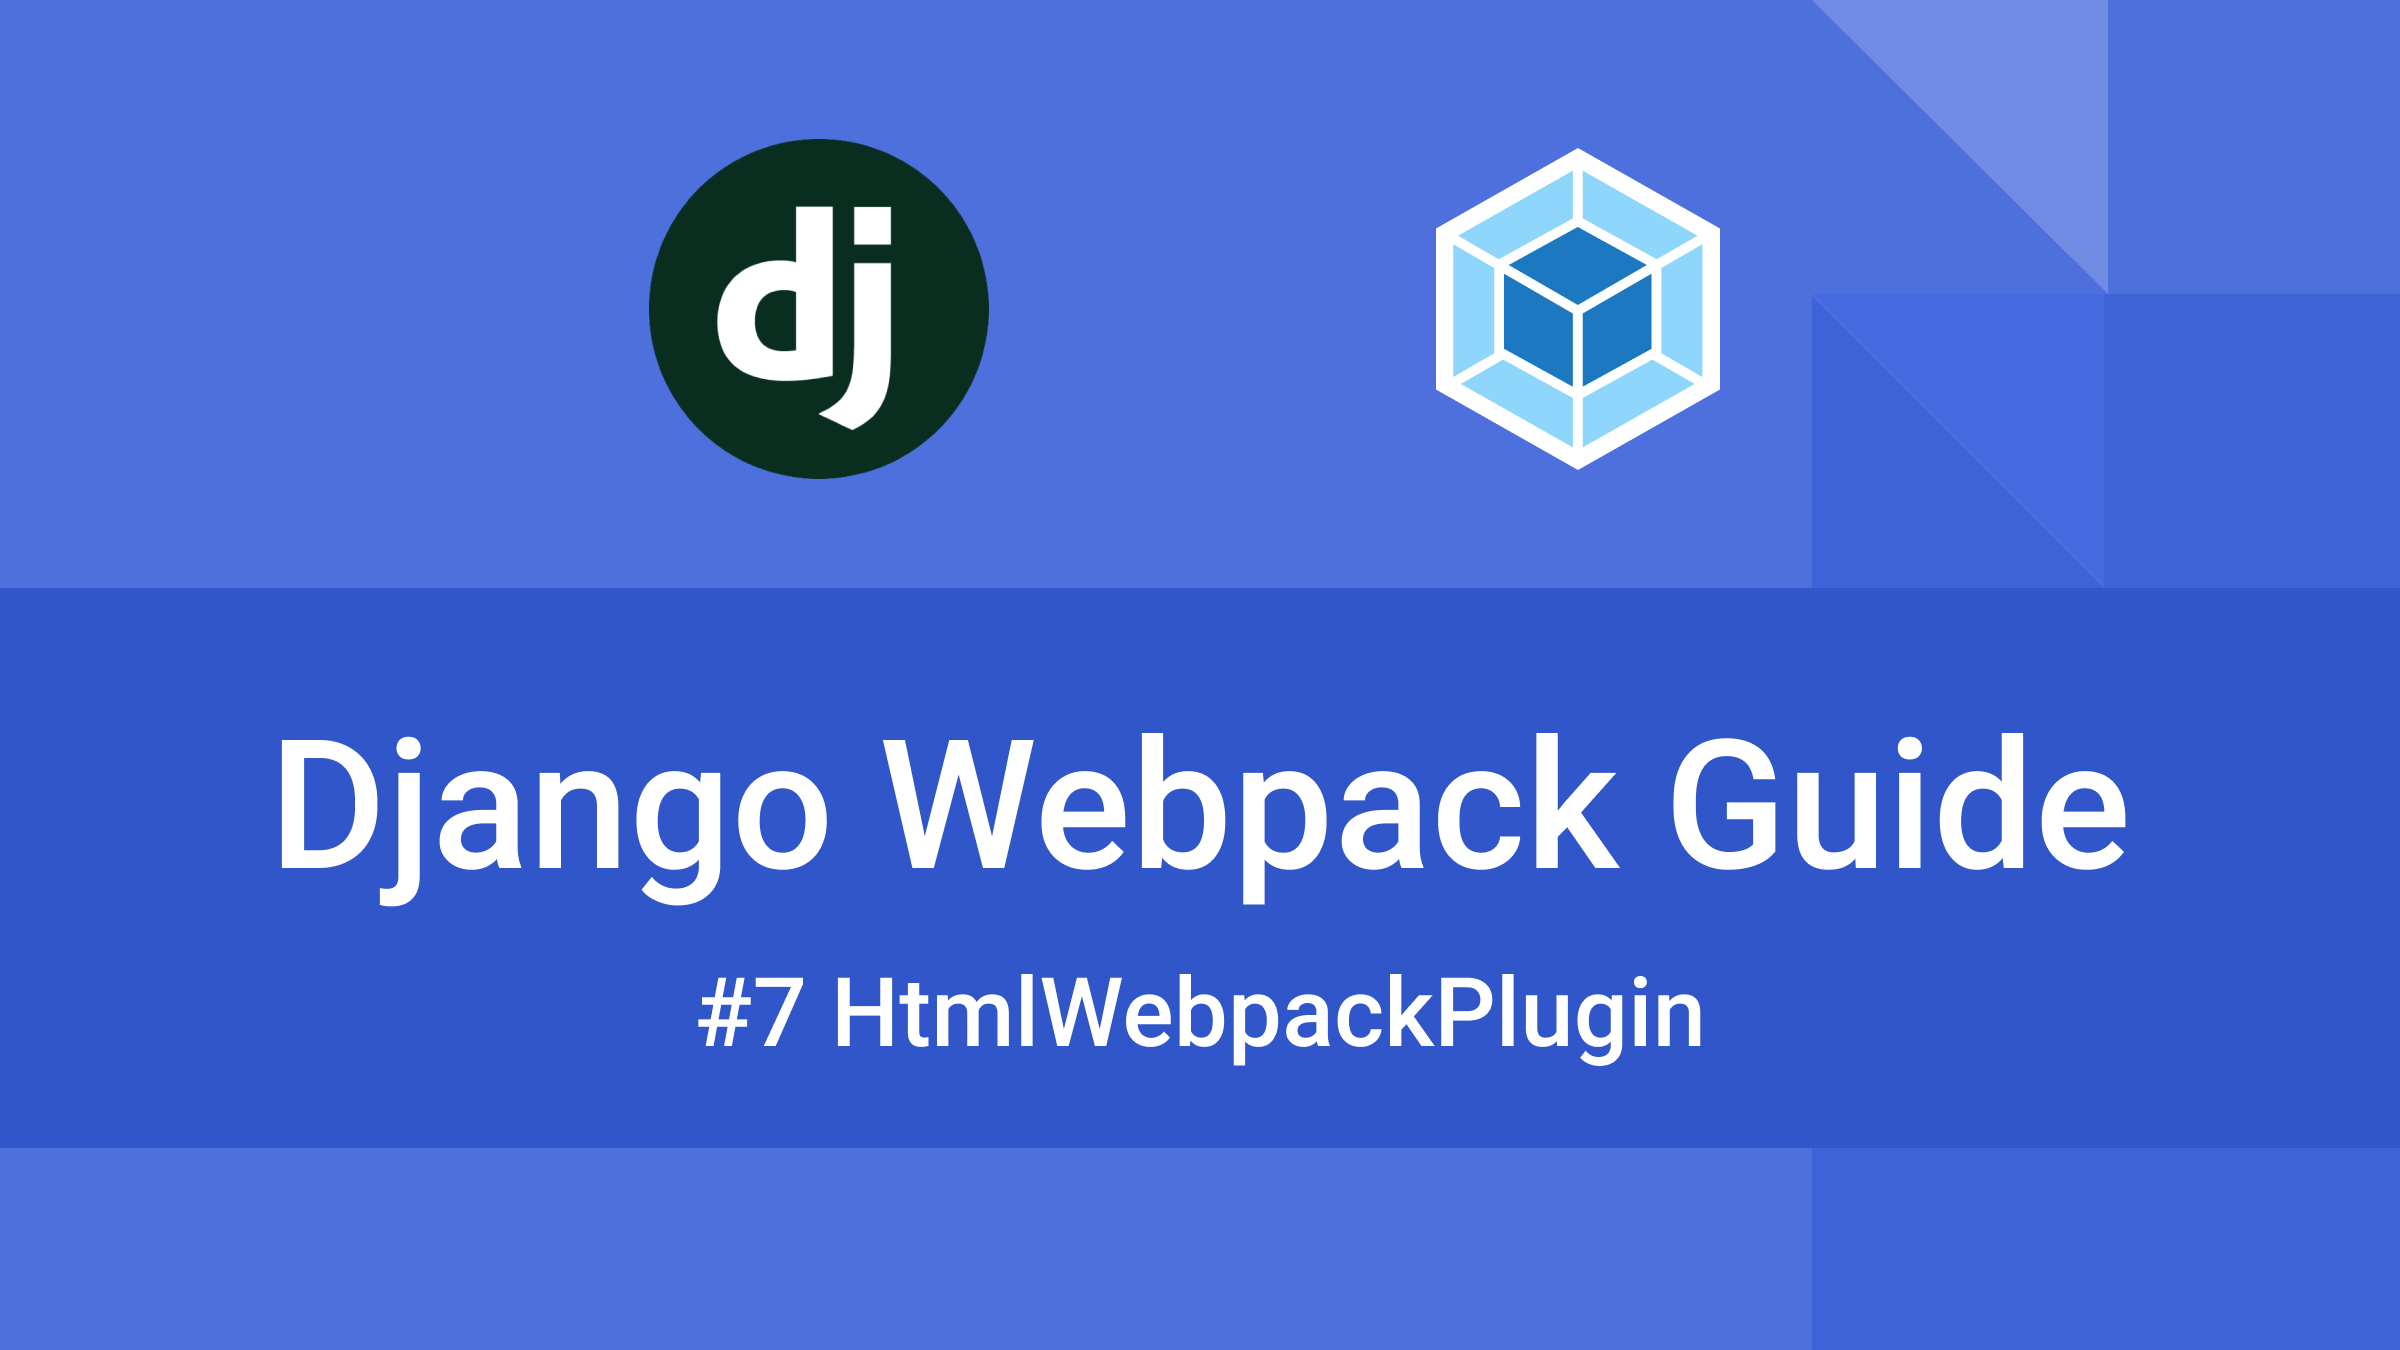 Tutorial: Getting Started With Webpack Applications in WebStorm | The ...